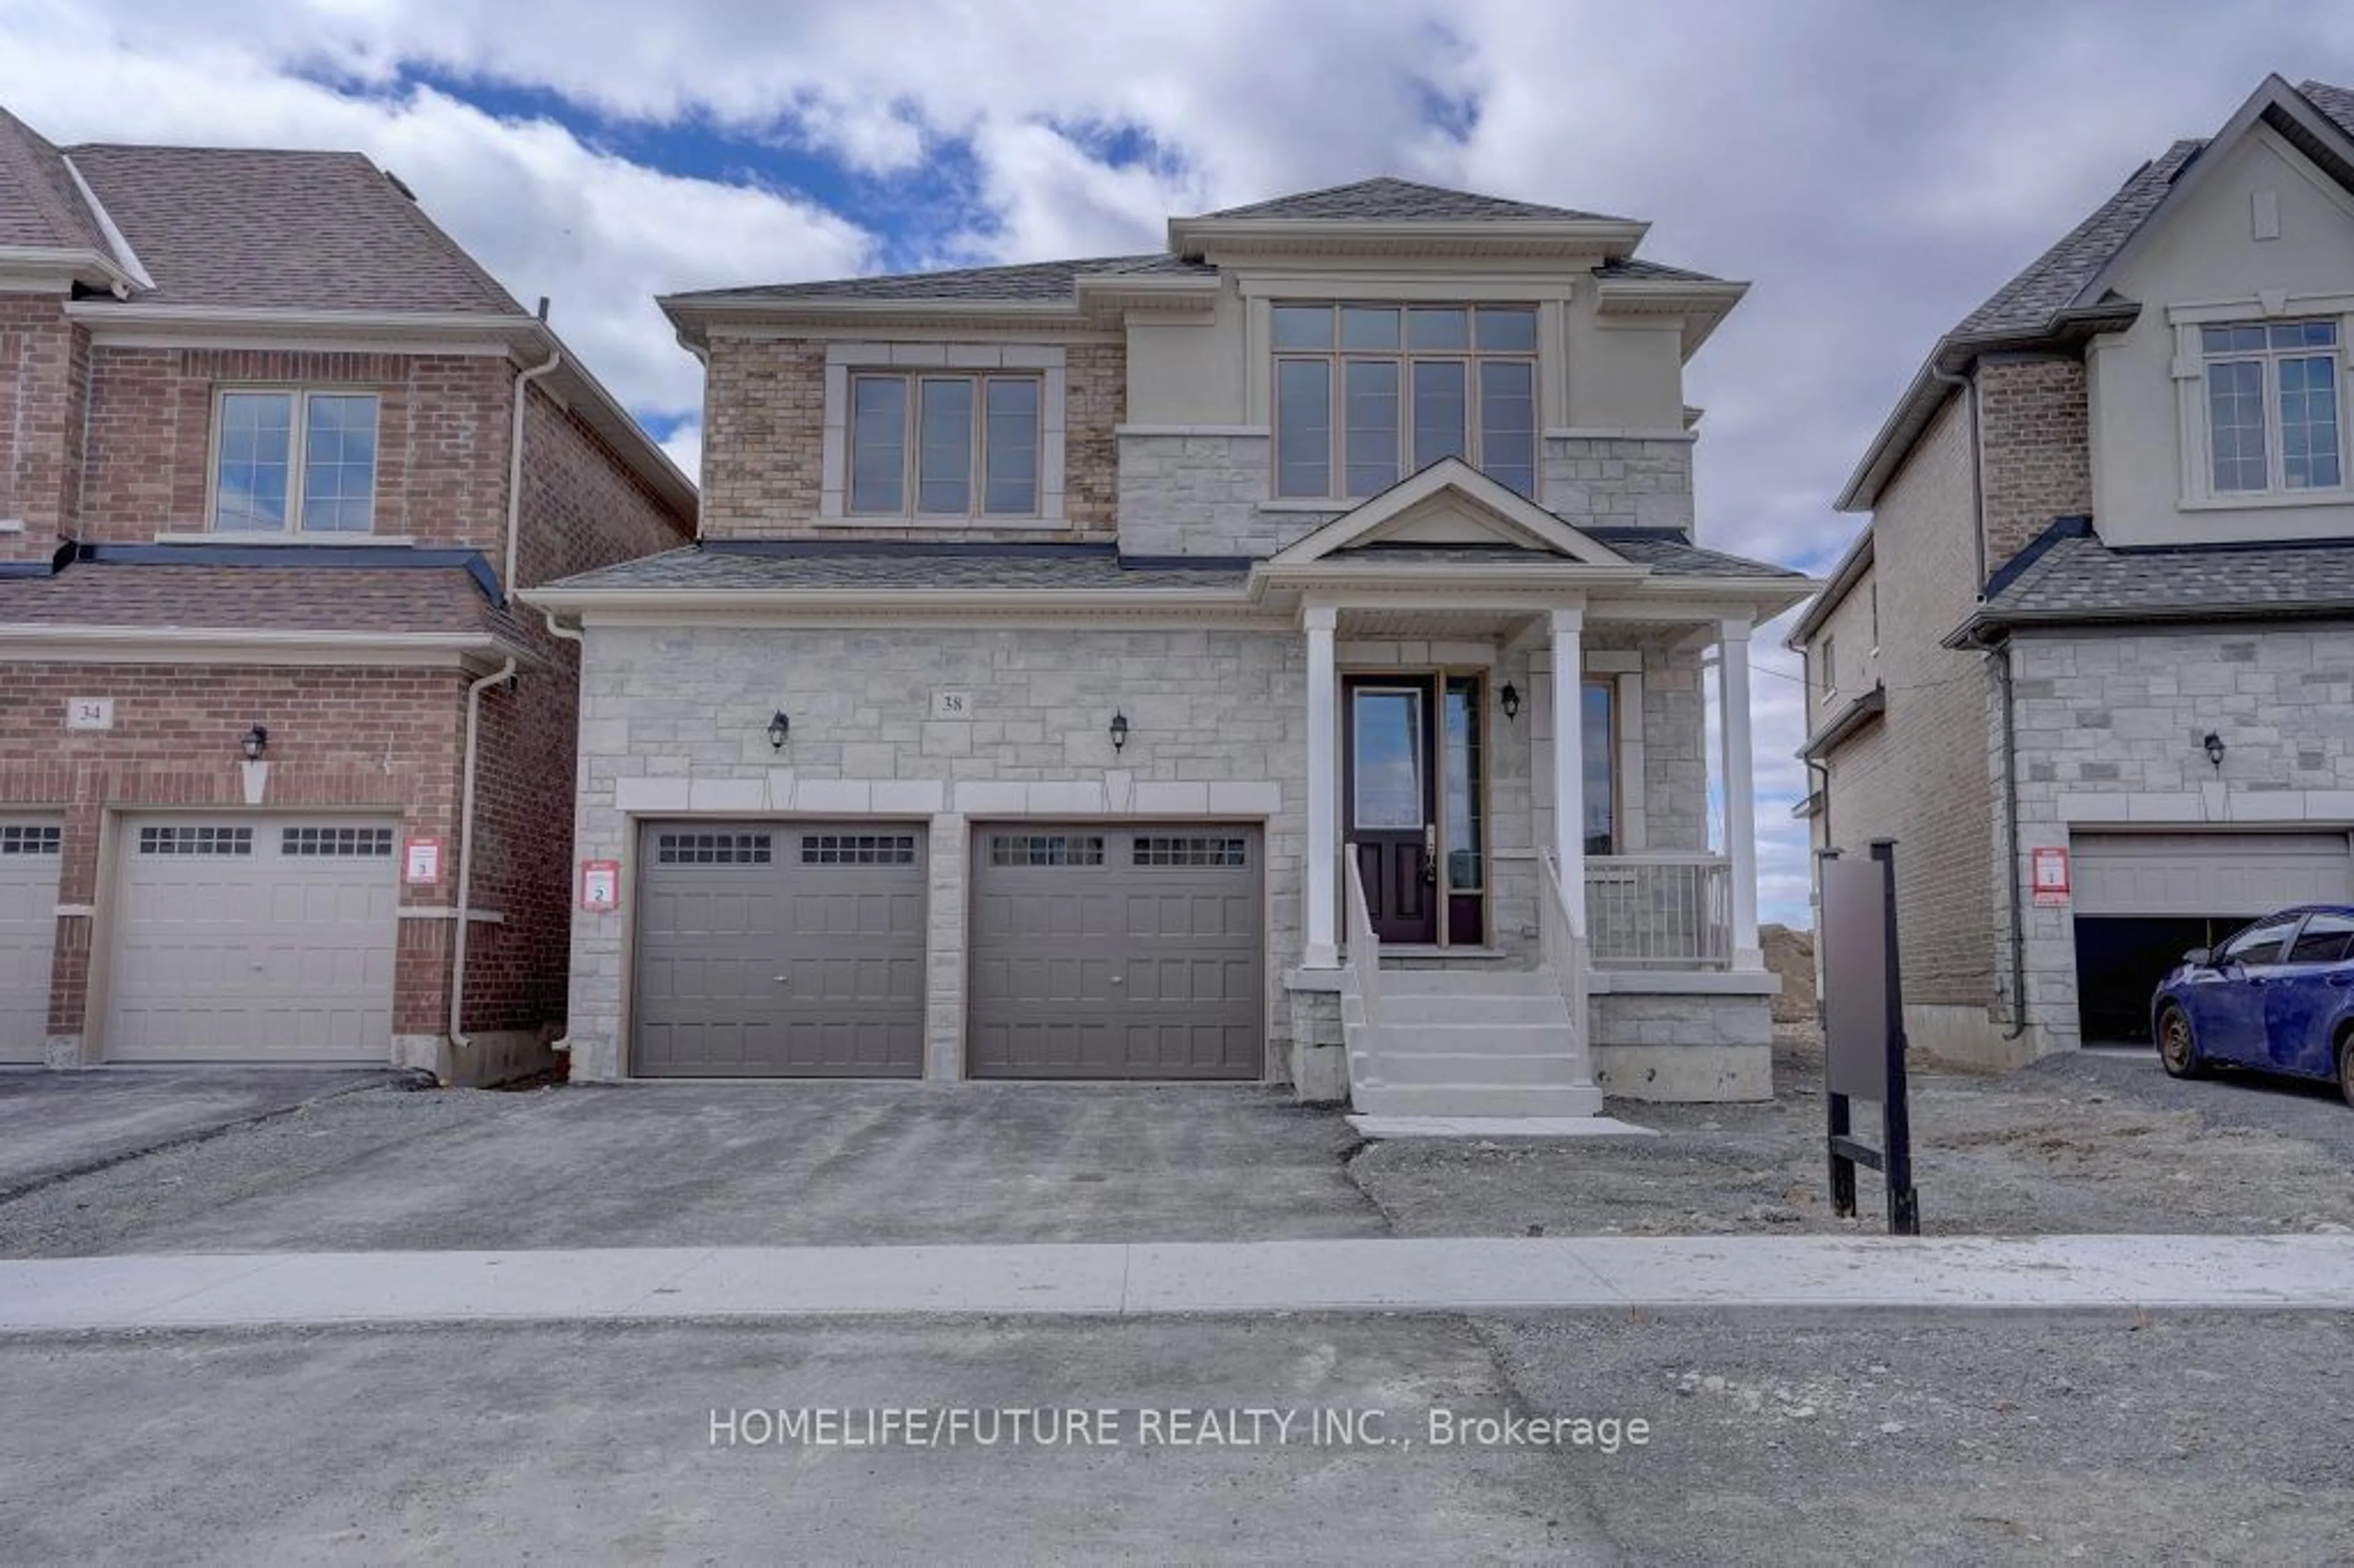 Frontside or backside of a home for 38 Wesley Brooks St, Clarington Ontario L1B 0W1